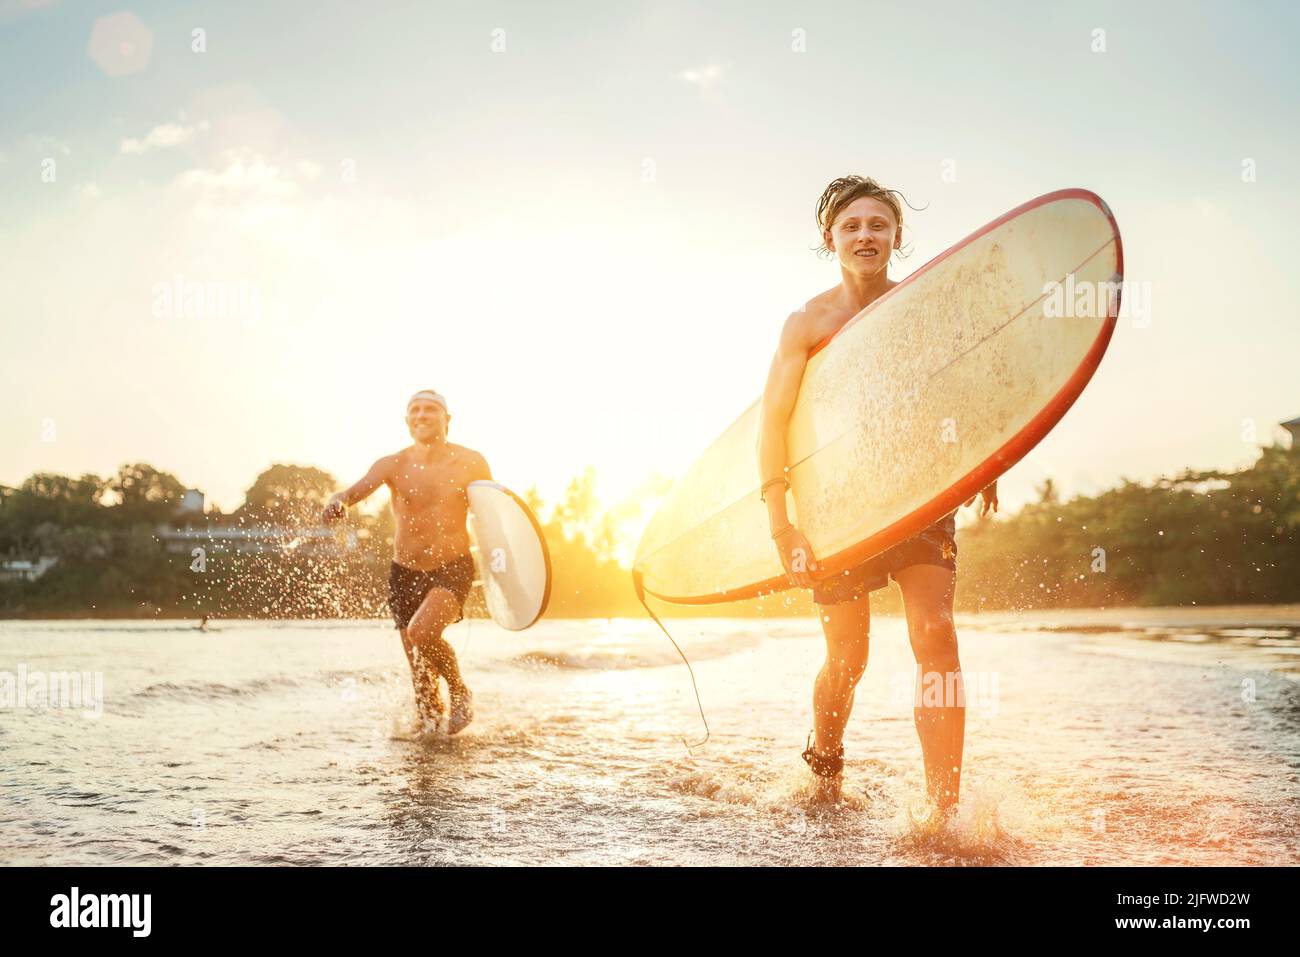 Young teen boy with a surfboard running with his father by ocean sandy beach after surfing. They are smiling and enjoying a beautiful sunset light. Fa Stock Photo